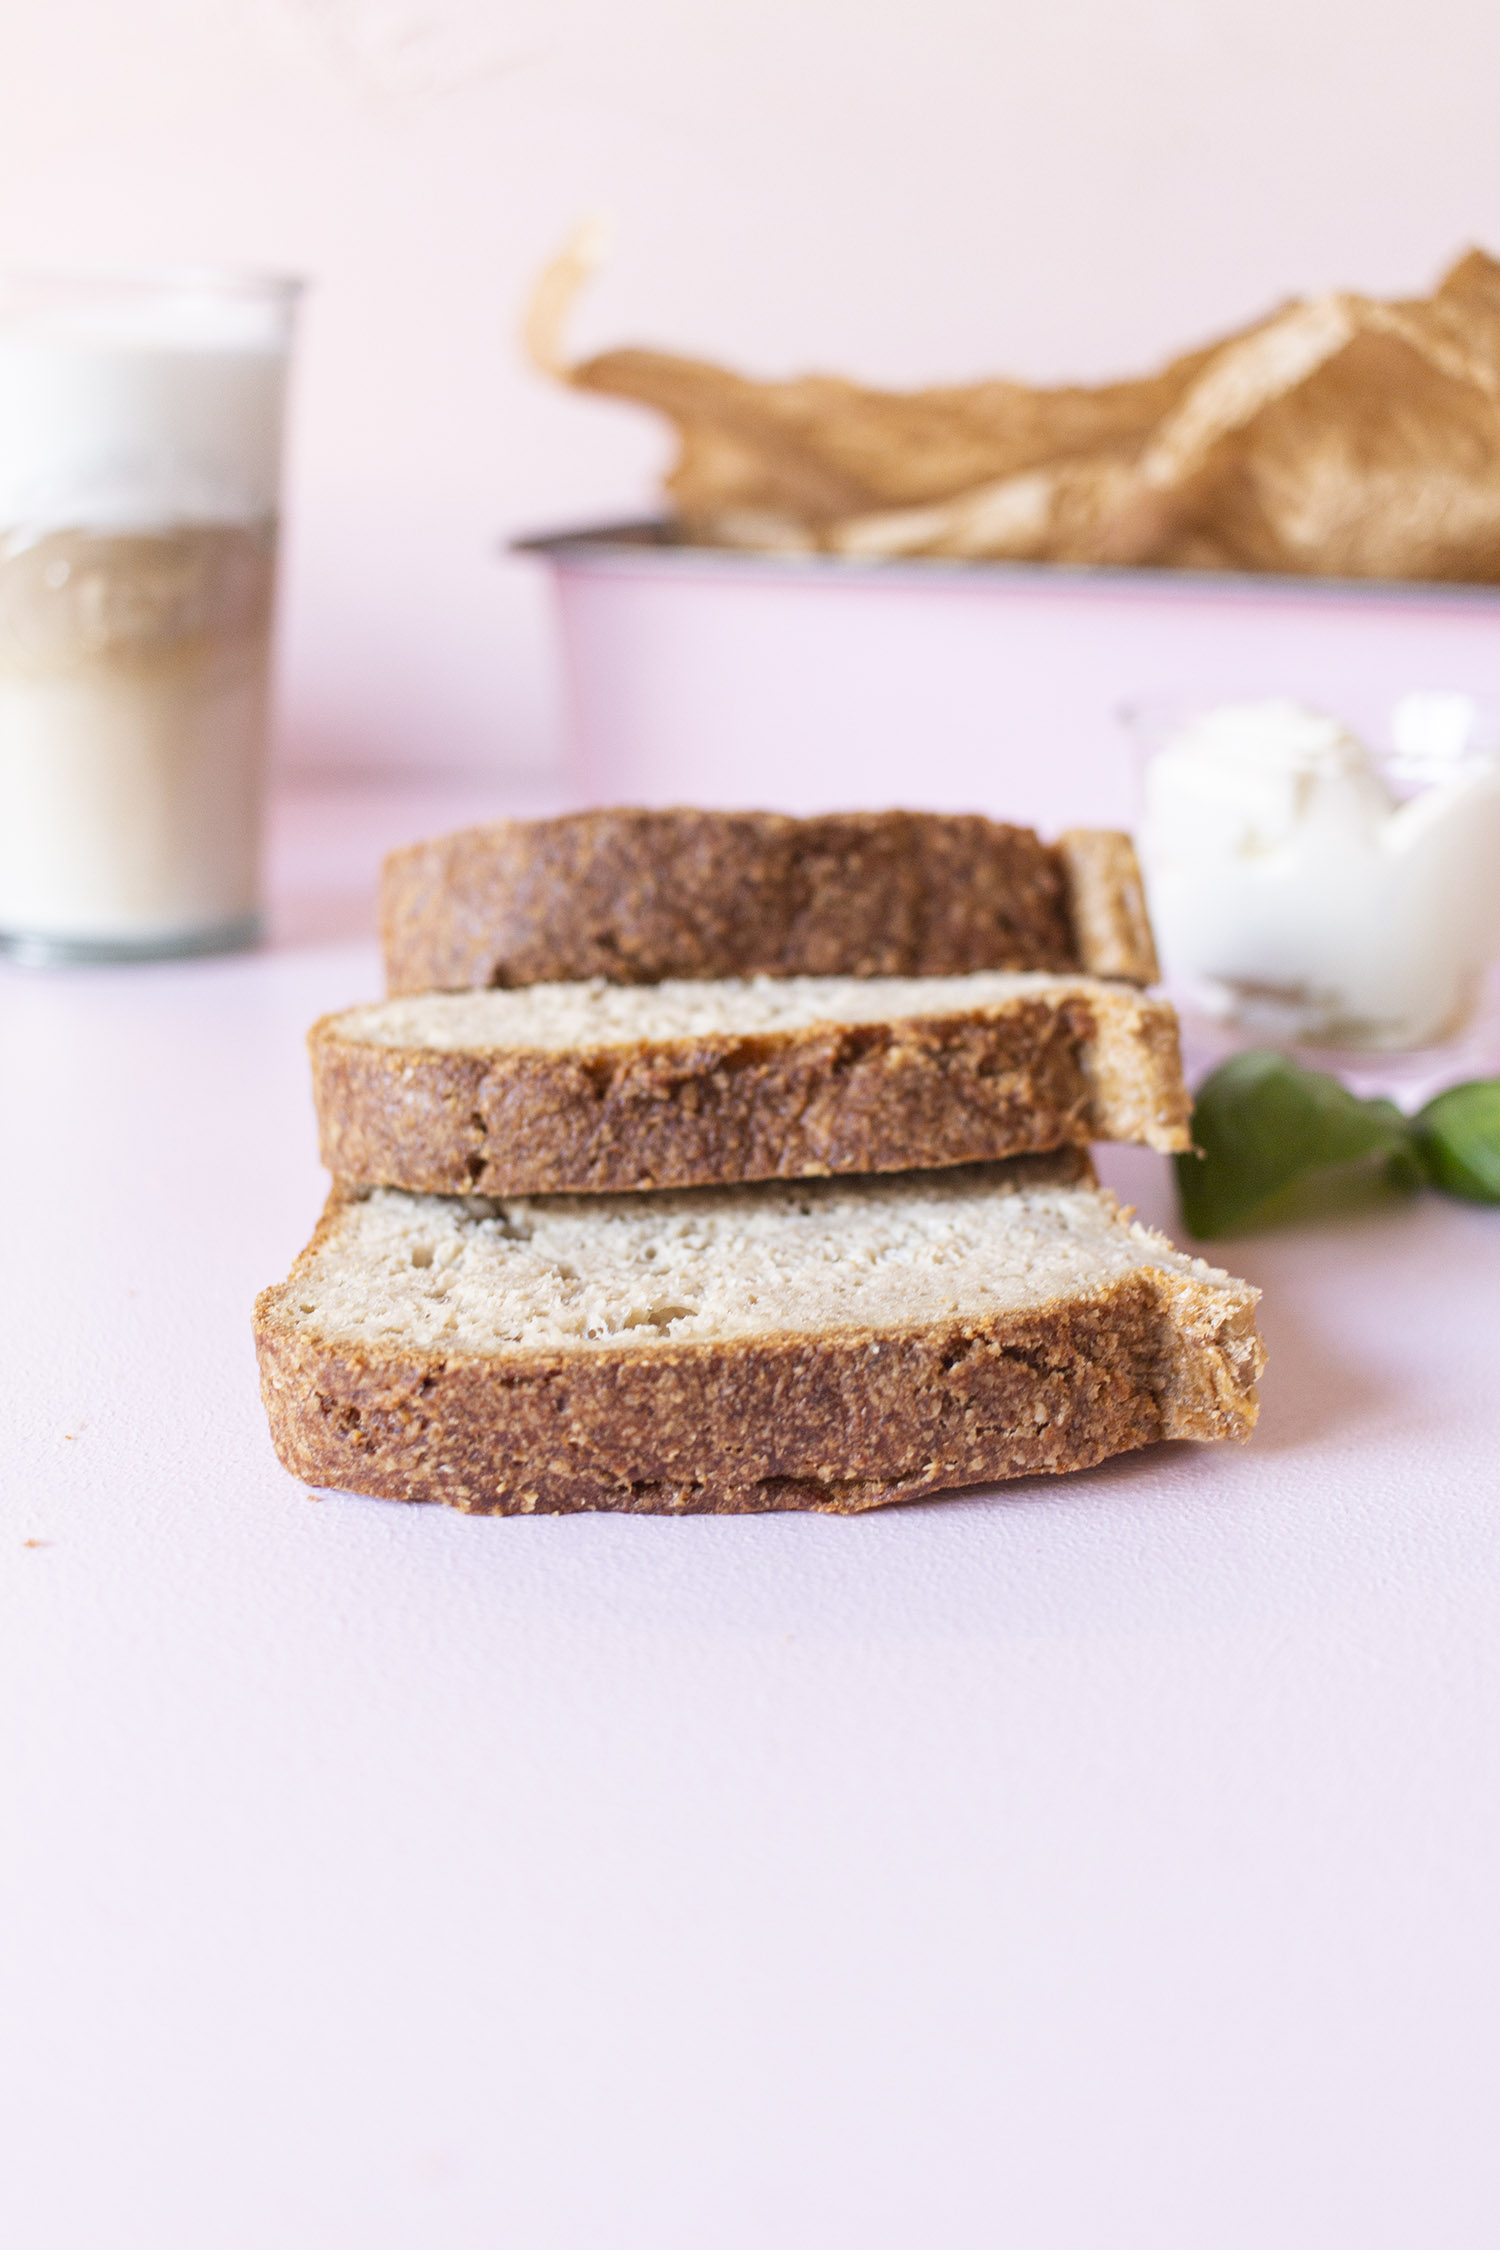 Toastbrot / Sandwichbrot (Low-Carb, glutenfrei, fluffig) – Low Carb ...